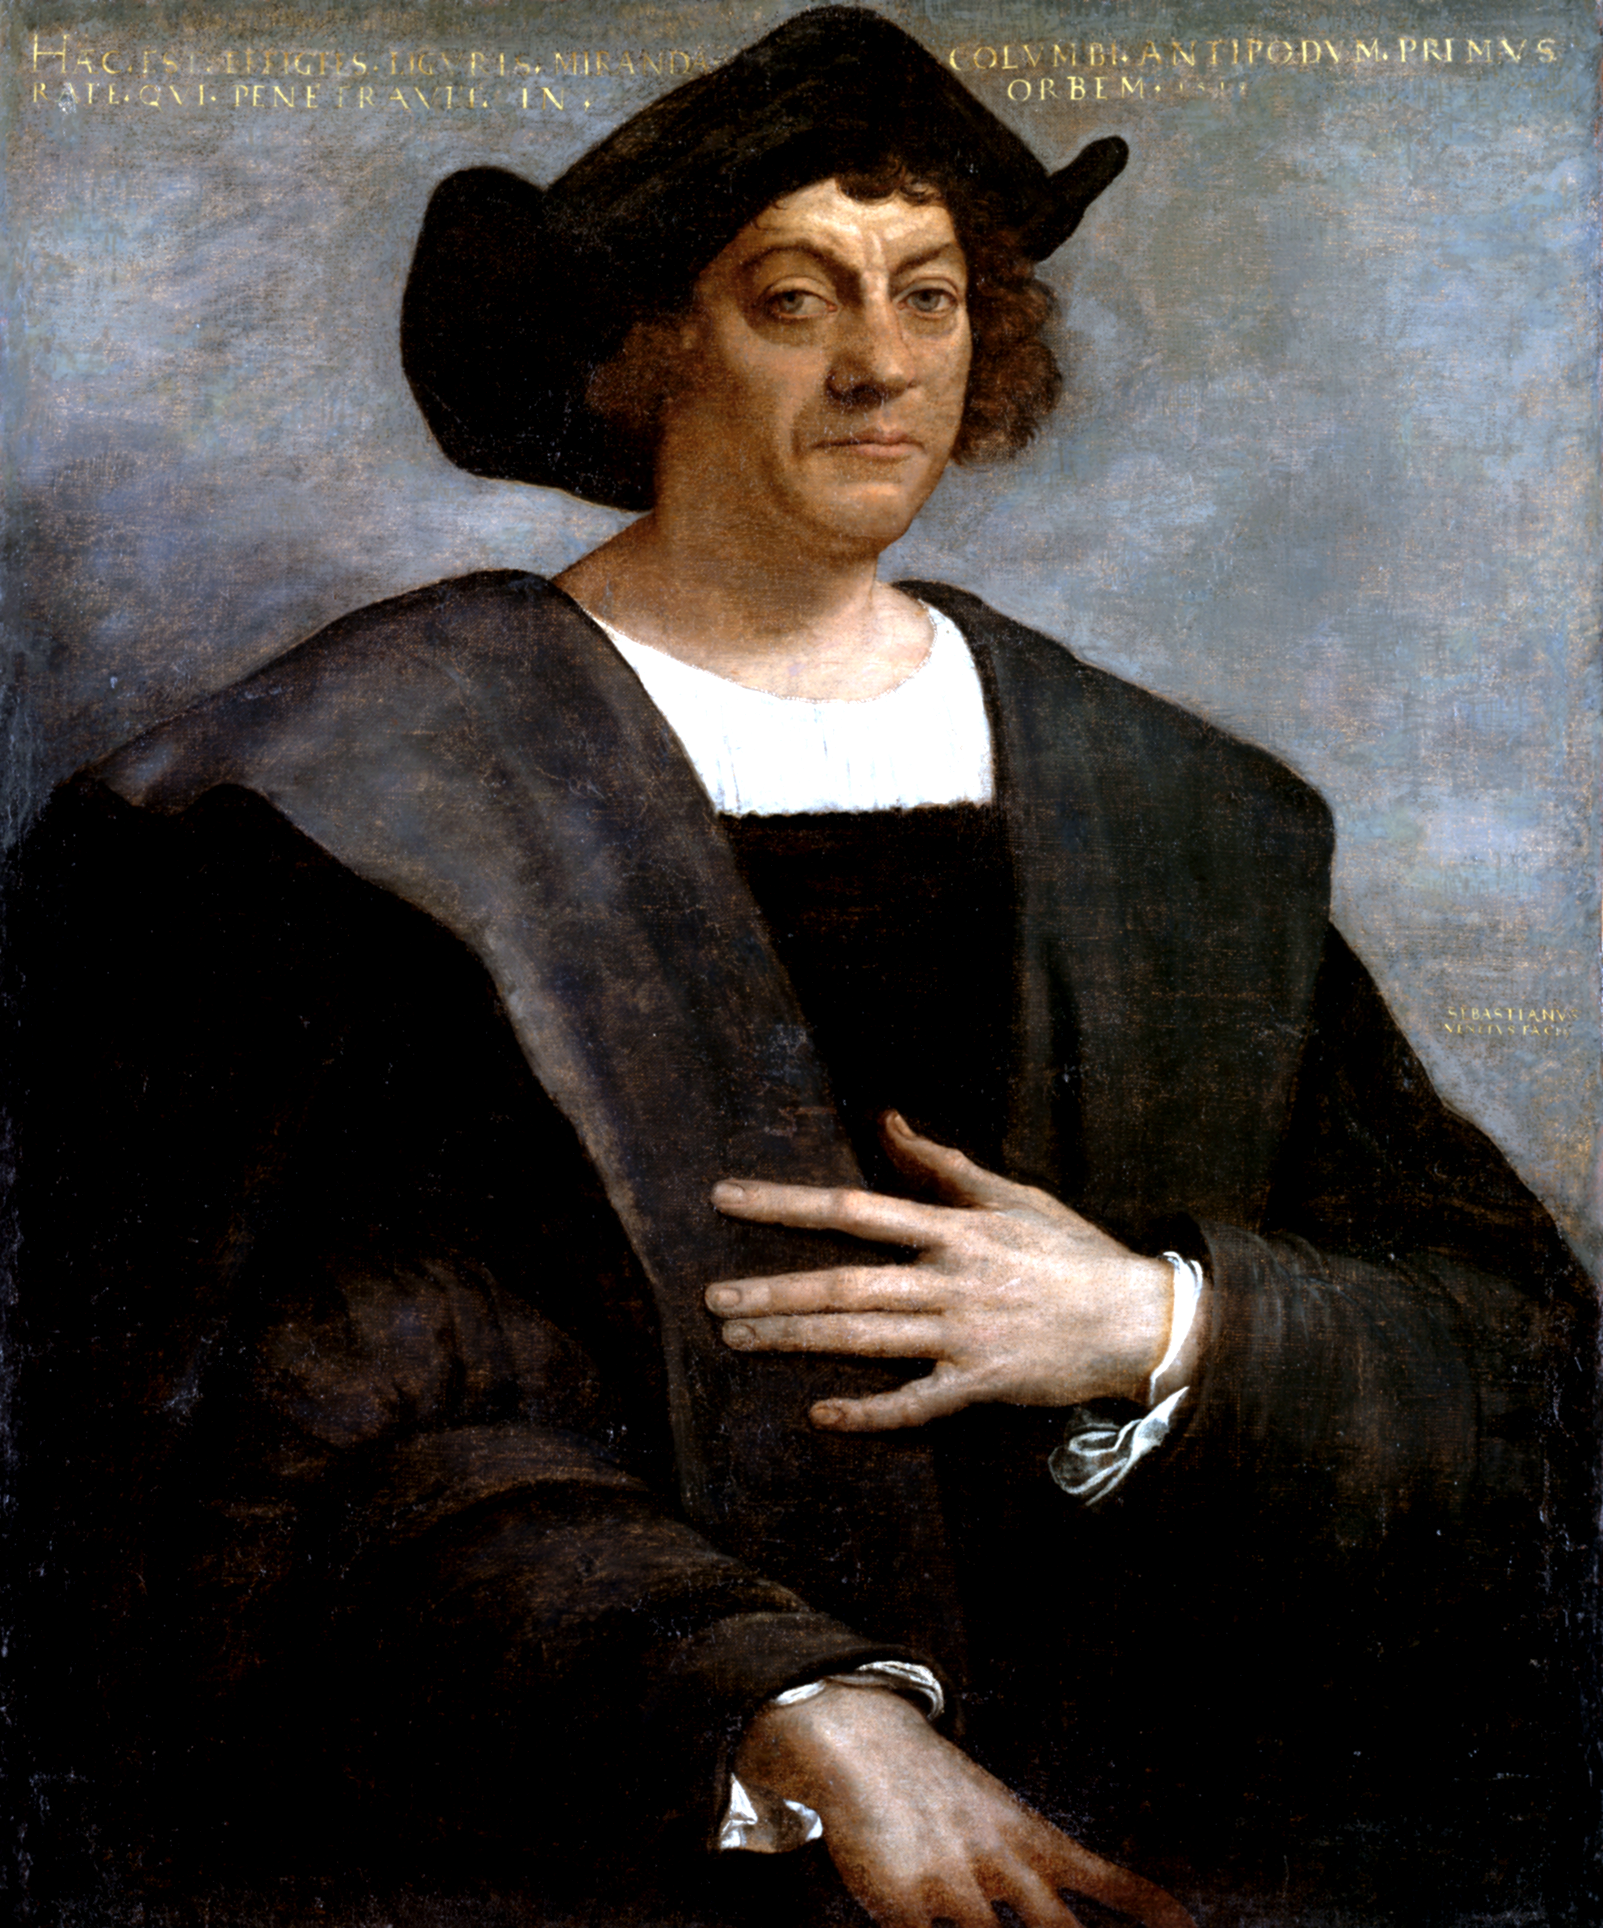 Columbus Day: Celebrate our history for what it is, warts and all!